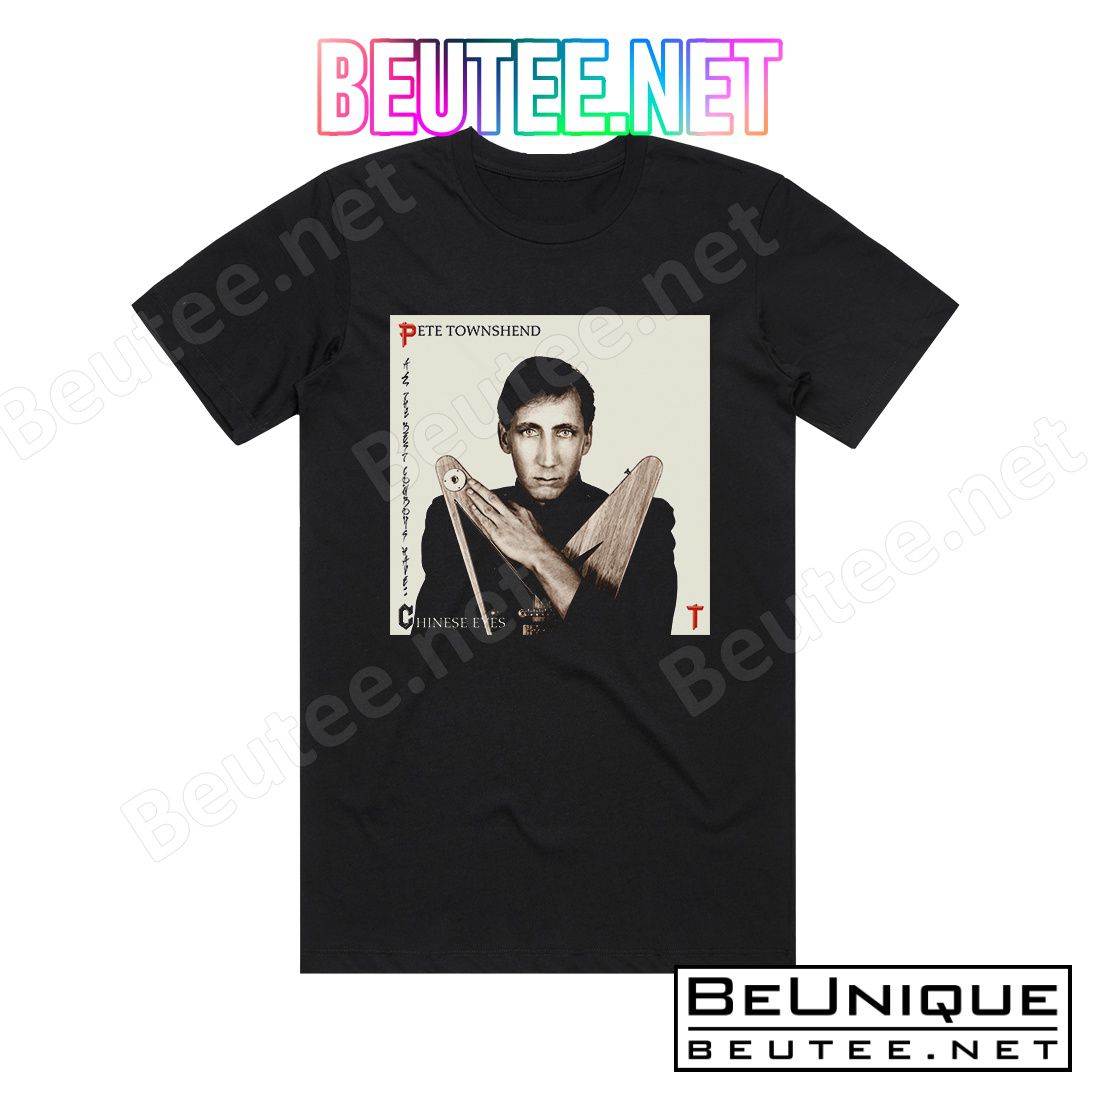 Pete Townshend All The Best Cowboys Have Chinese Eyes Album Cover T-Shirt